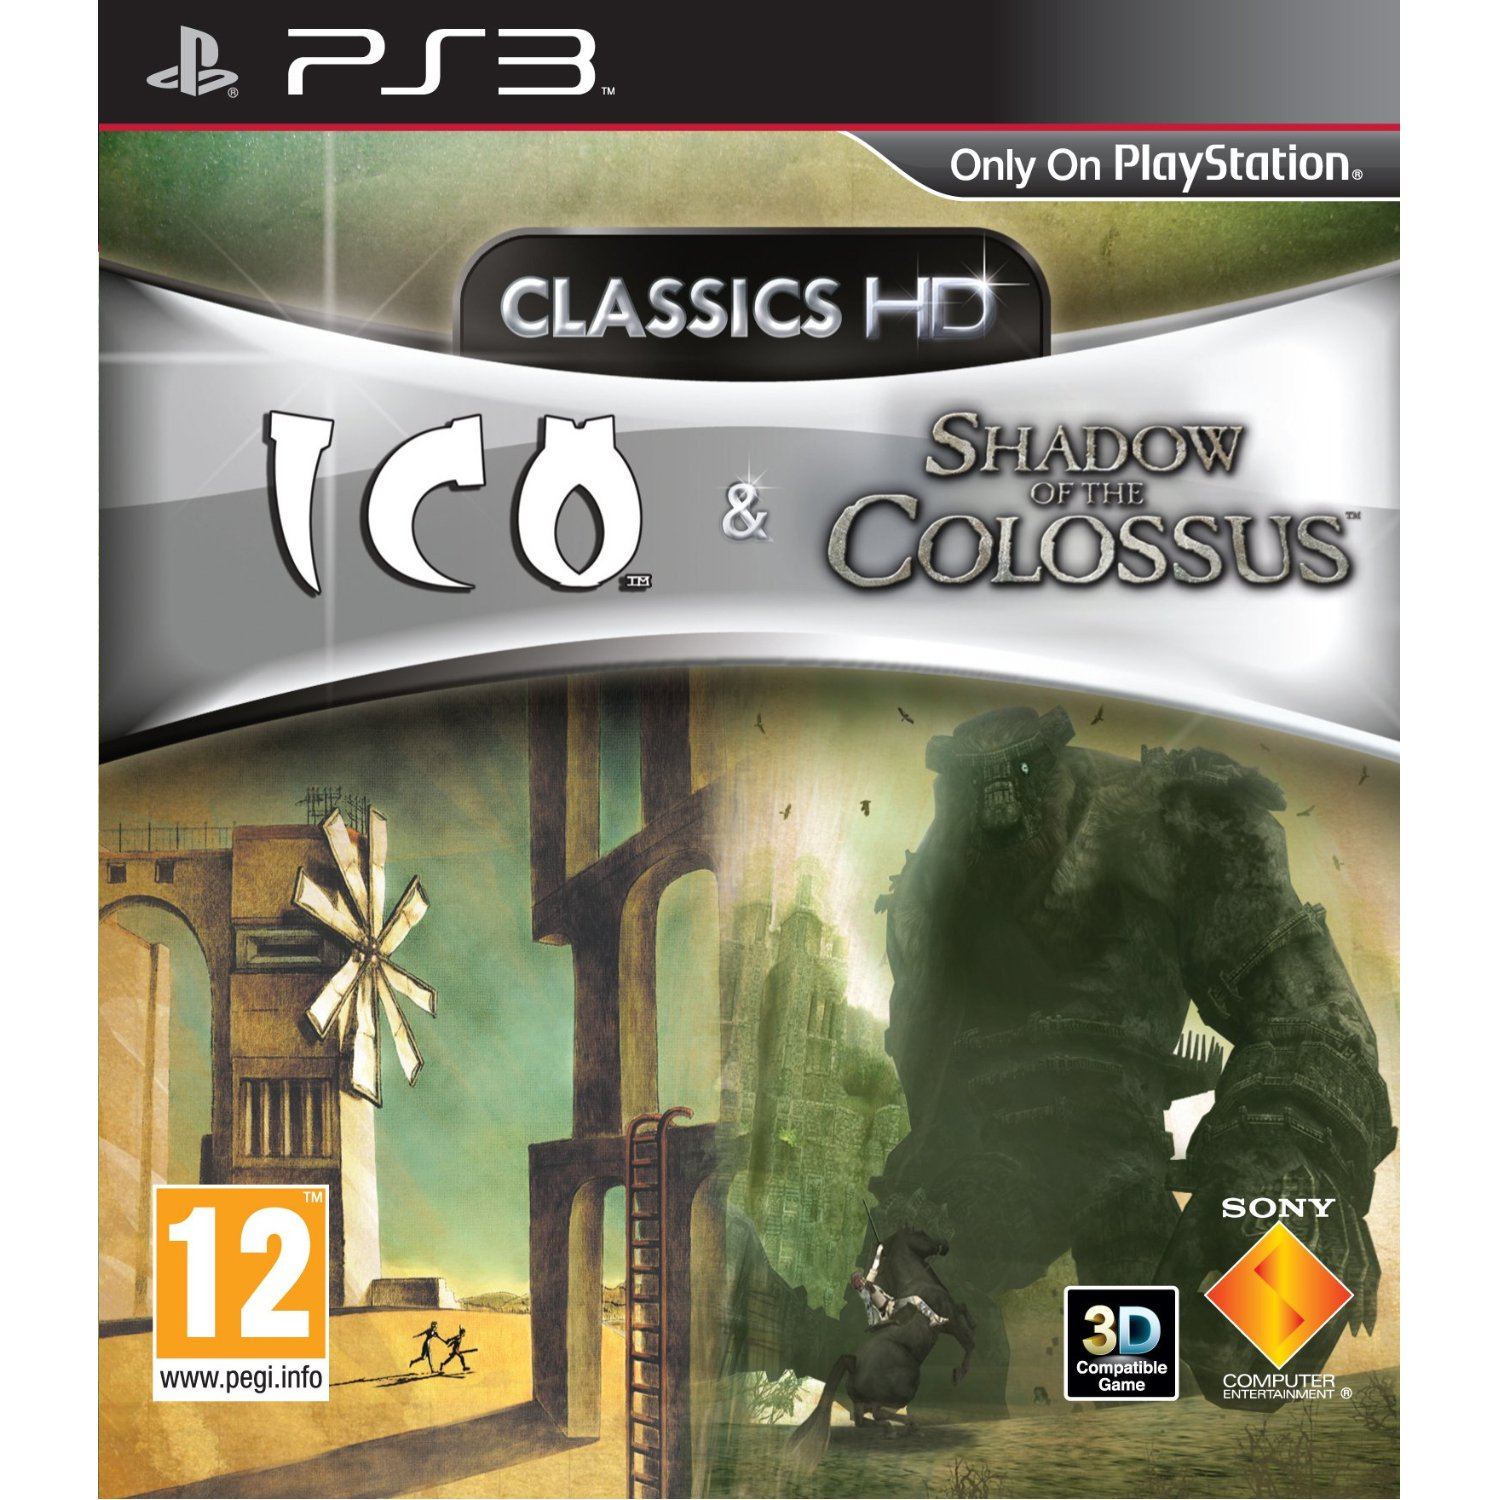 Shadow of the Colossus Special Edition - PlayStation 4